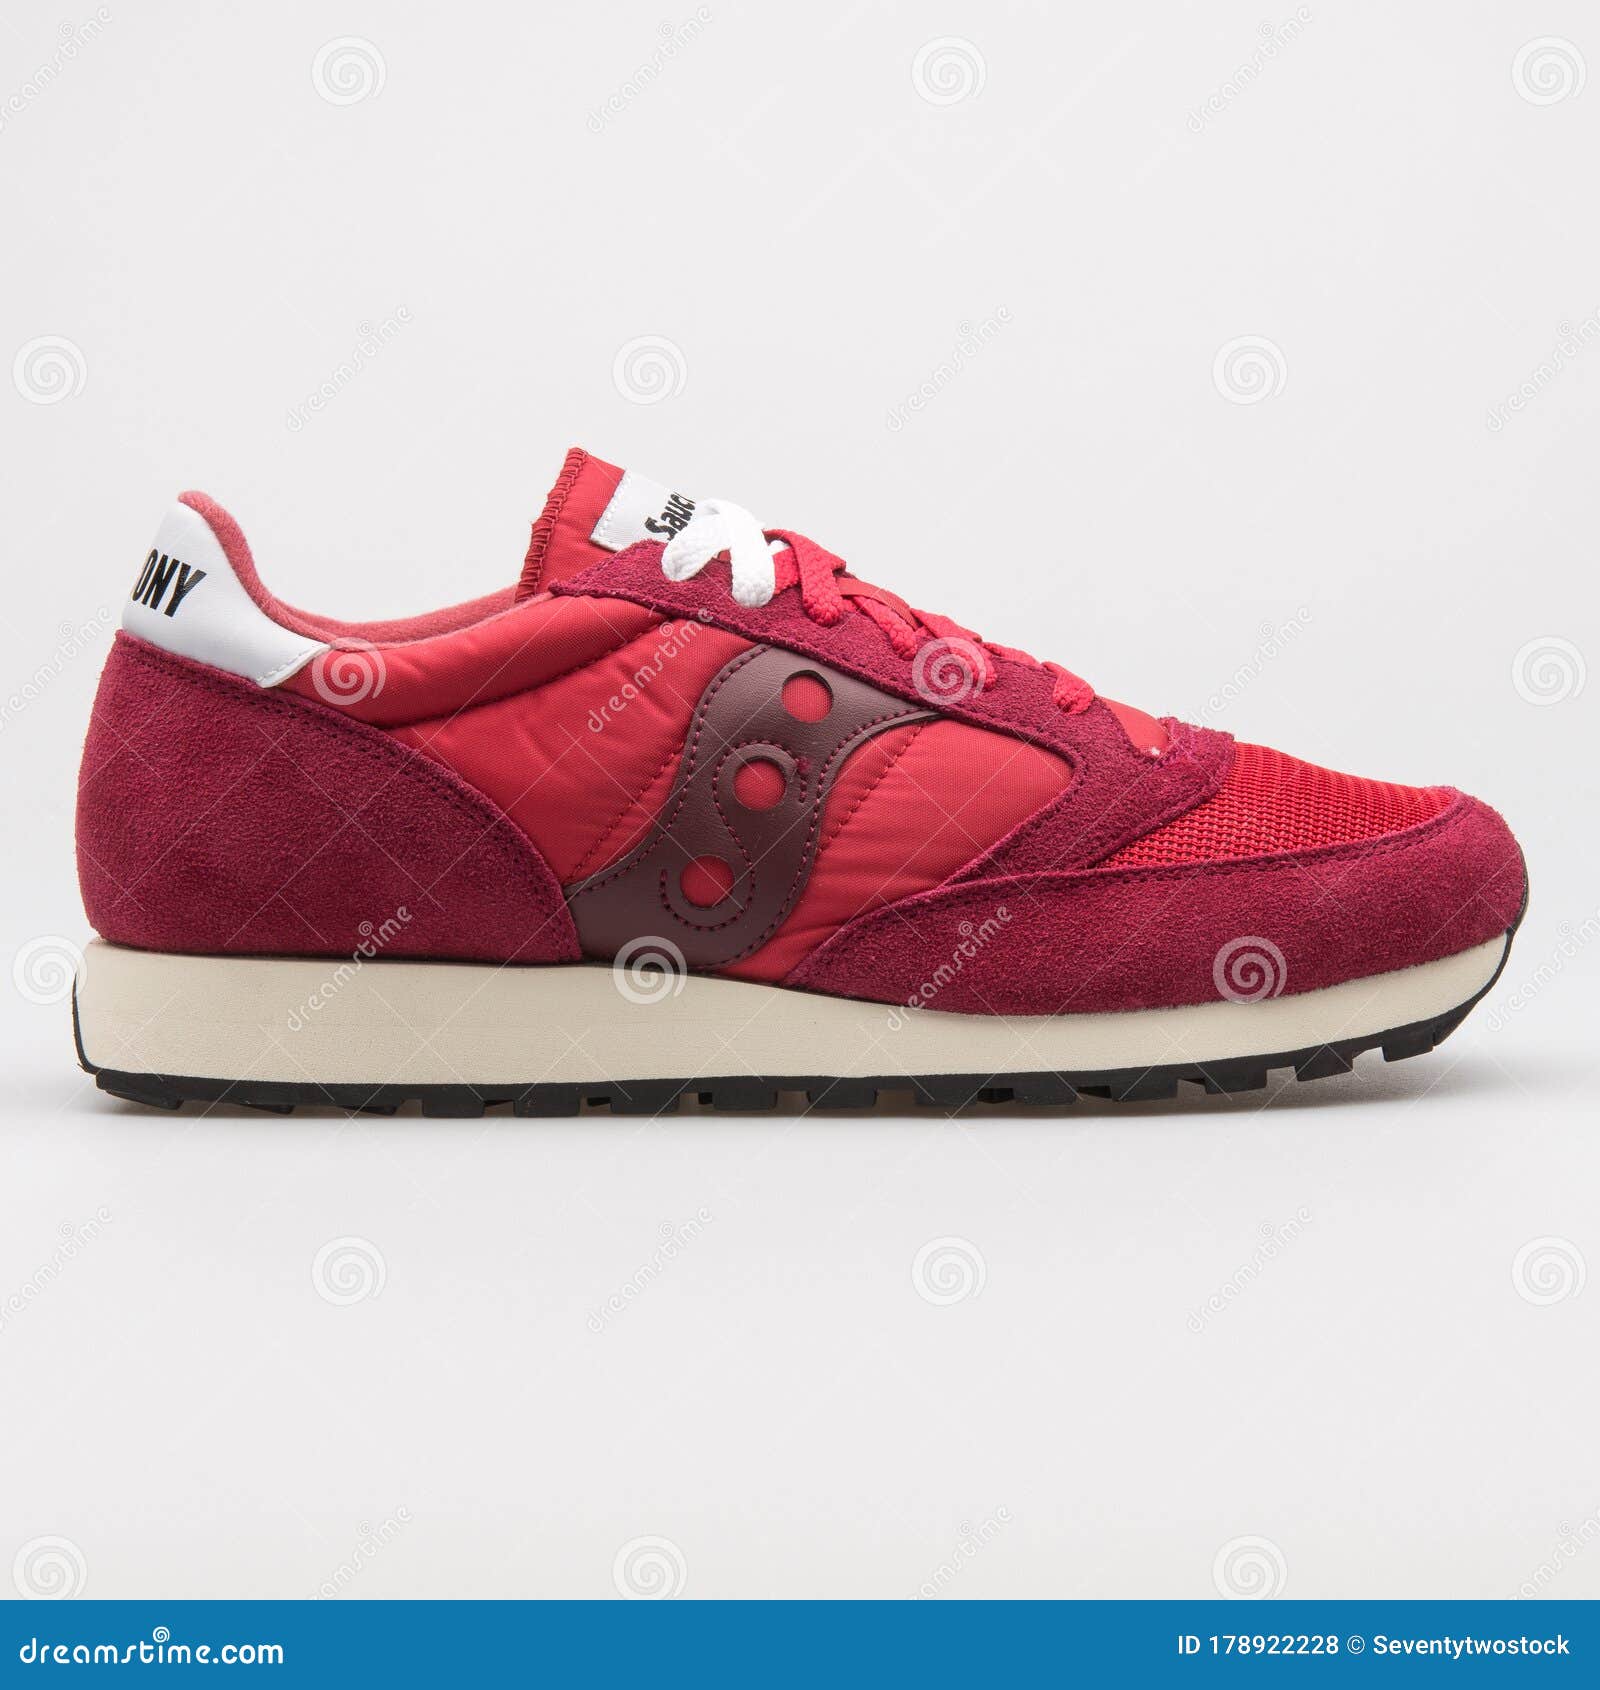 Saucony JAZZ ORIGINAL S2044 men's sneakers: for sale at 79.99€ on  Mecshopping.it